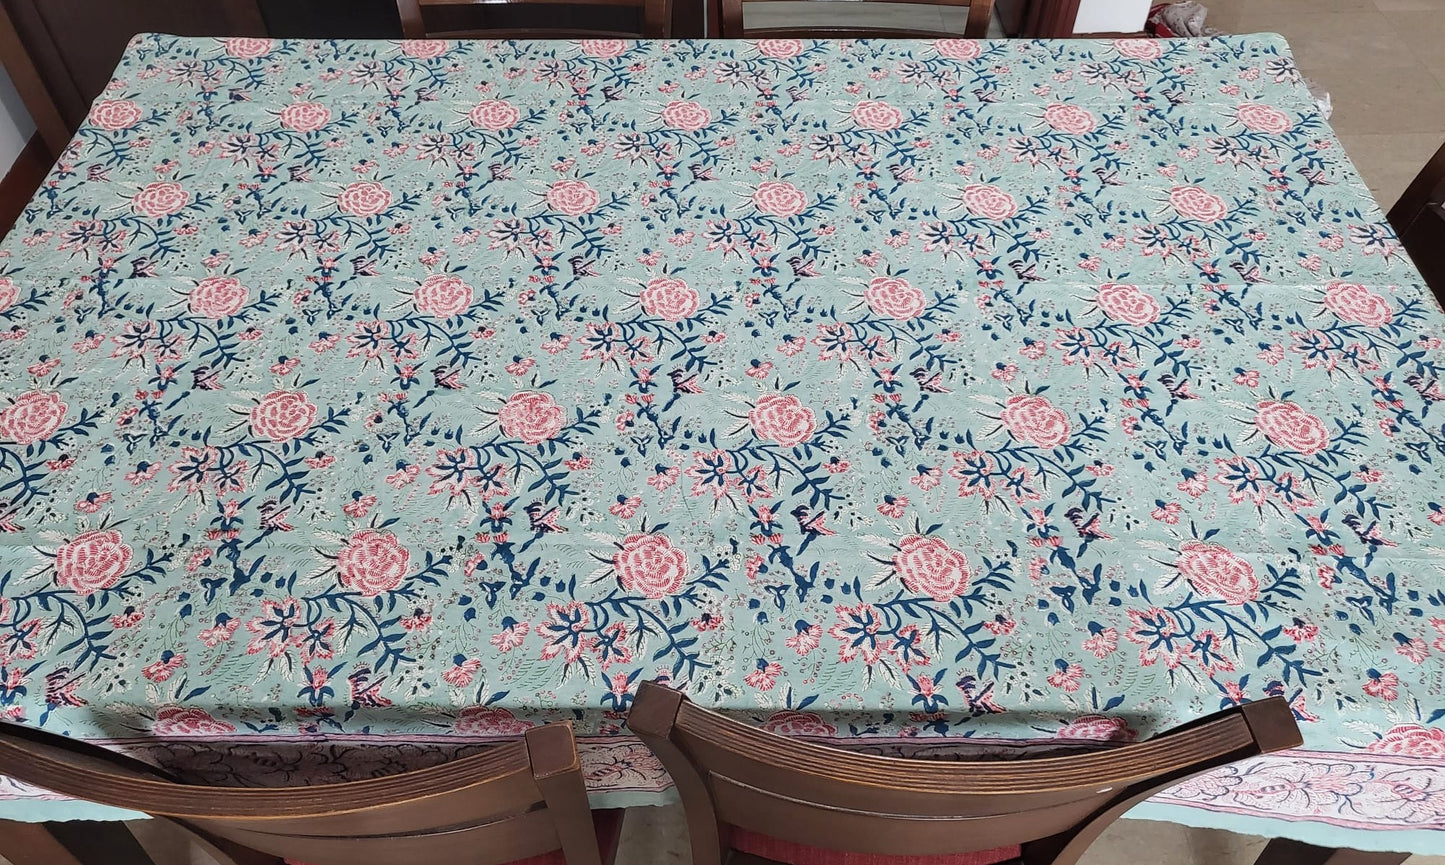 floral block printed table cover made from cotton